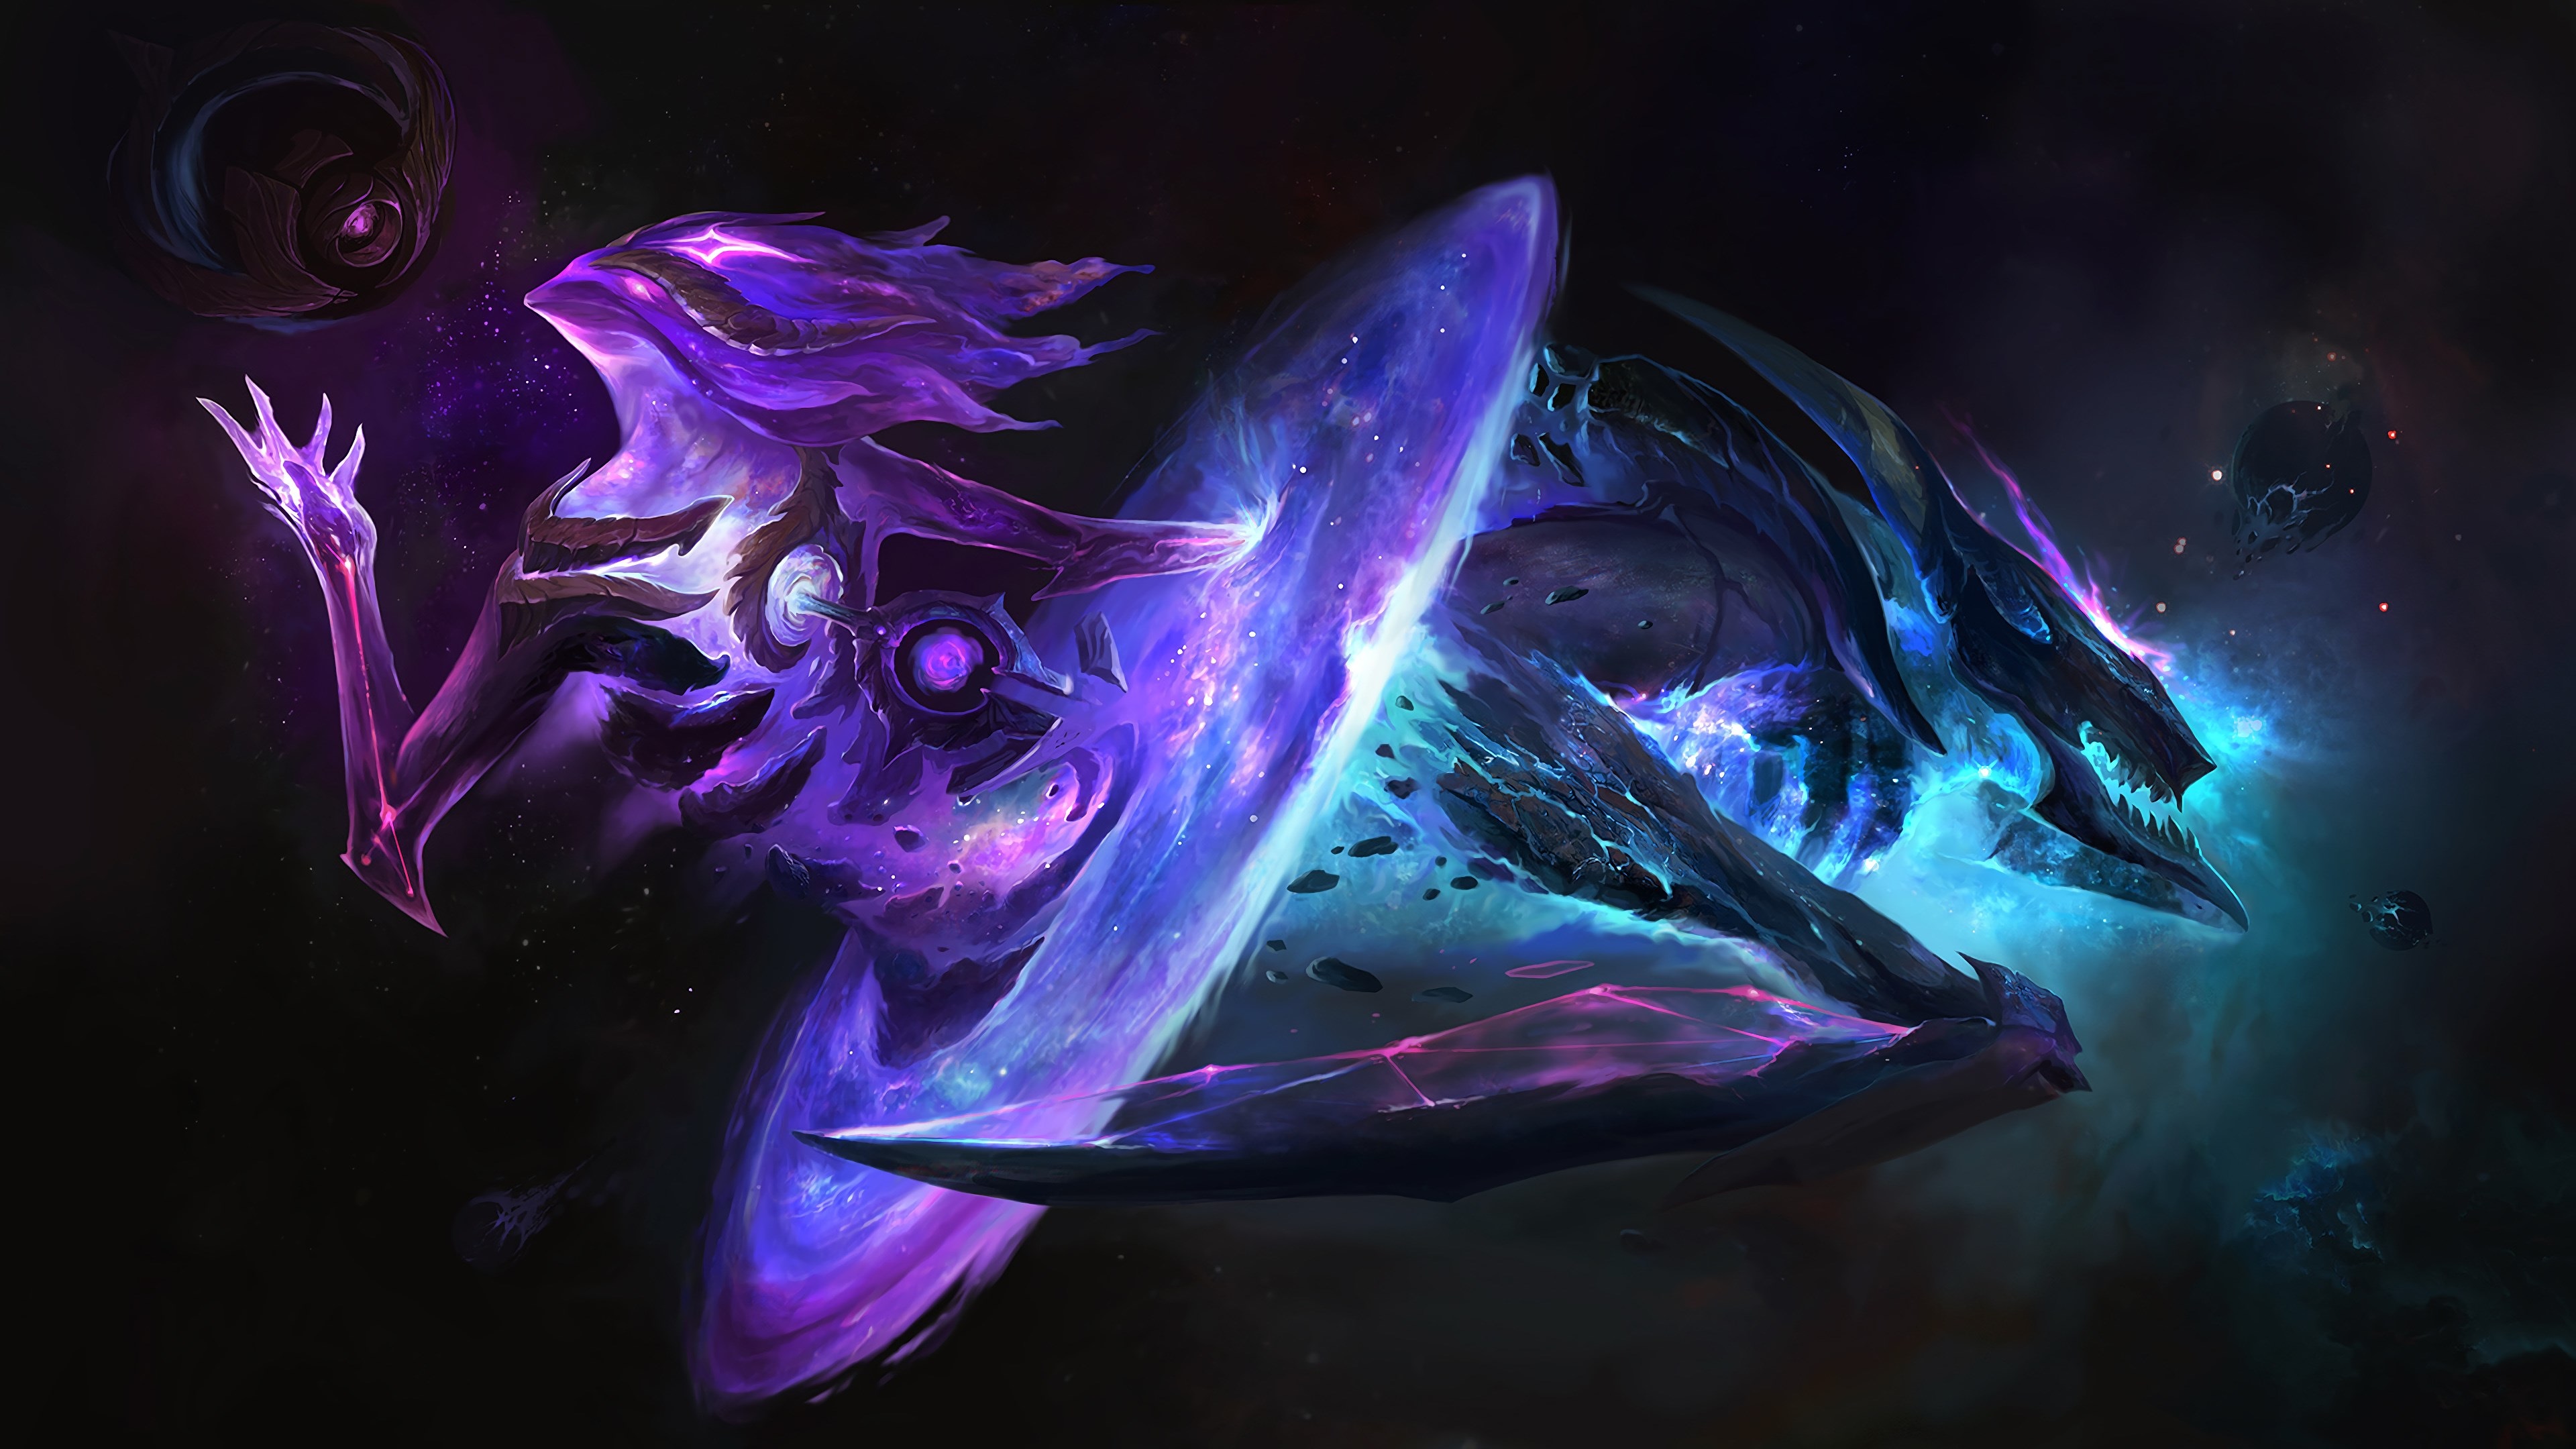 League of legends k hd wallpaper pic p k k hd wallpapers backgrounds free download rare gallery